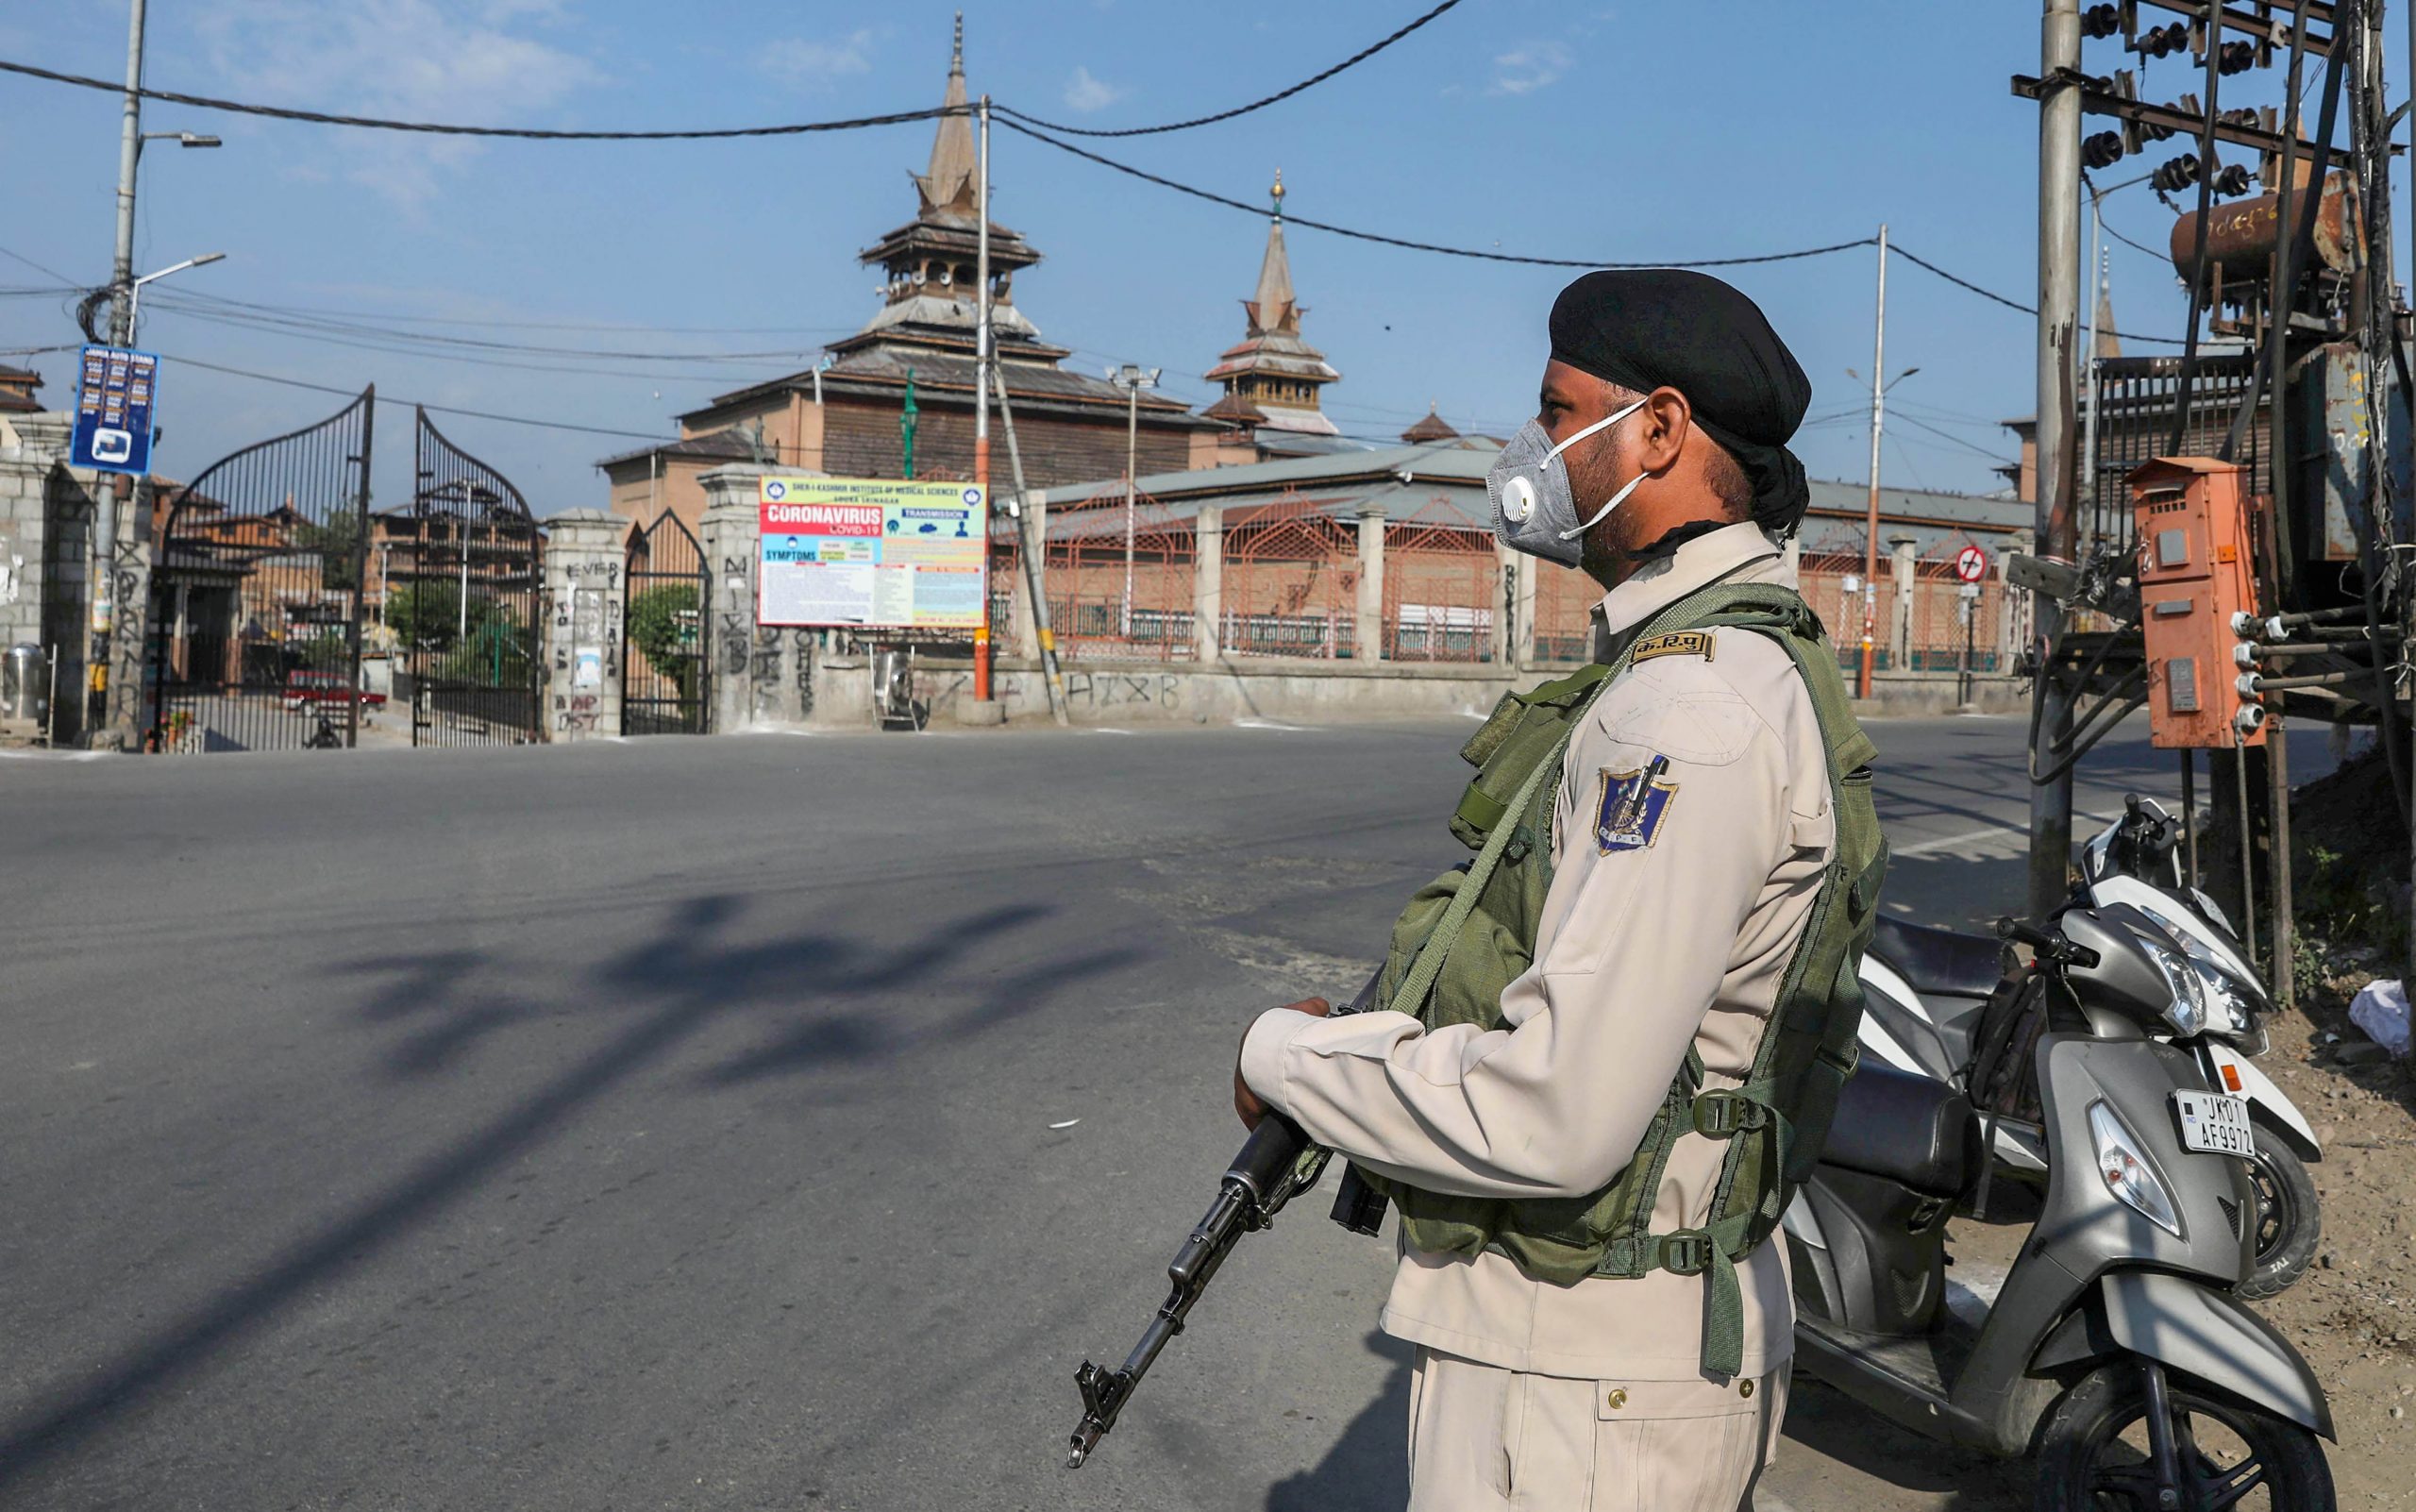 Article 370 abrogation anniversary: Curfew imposed in Kashmir today